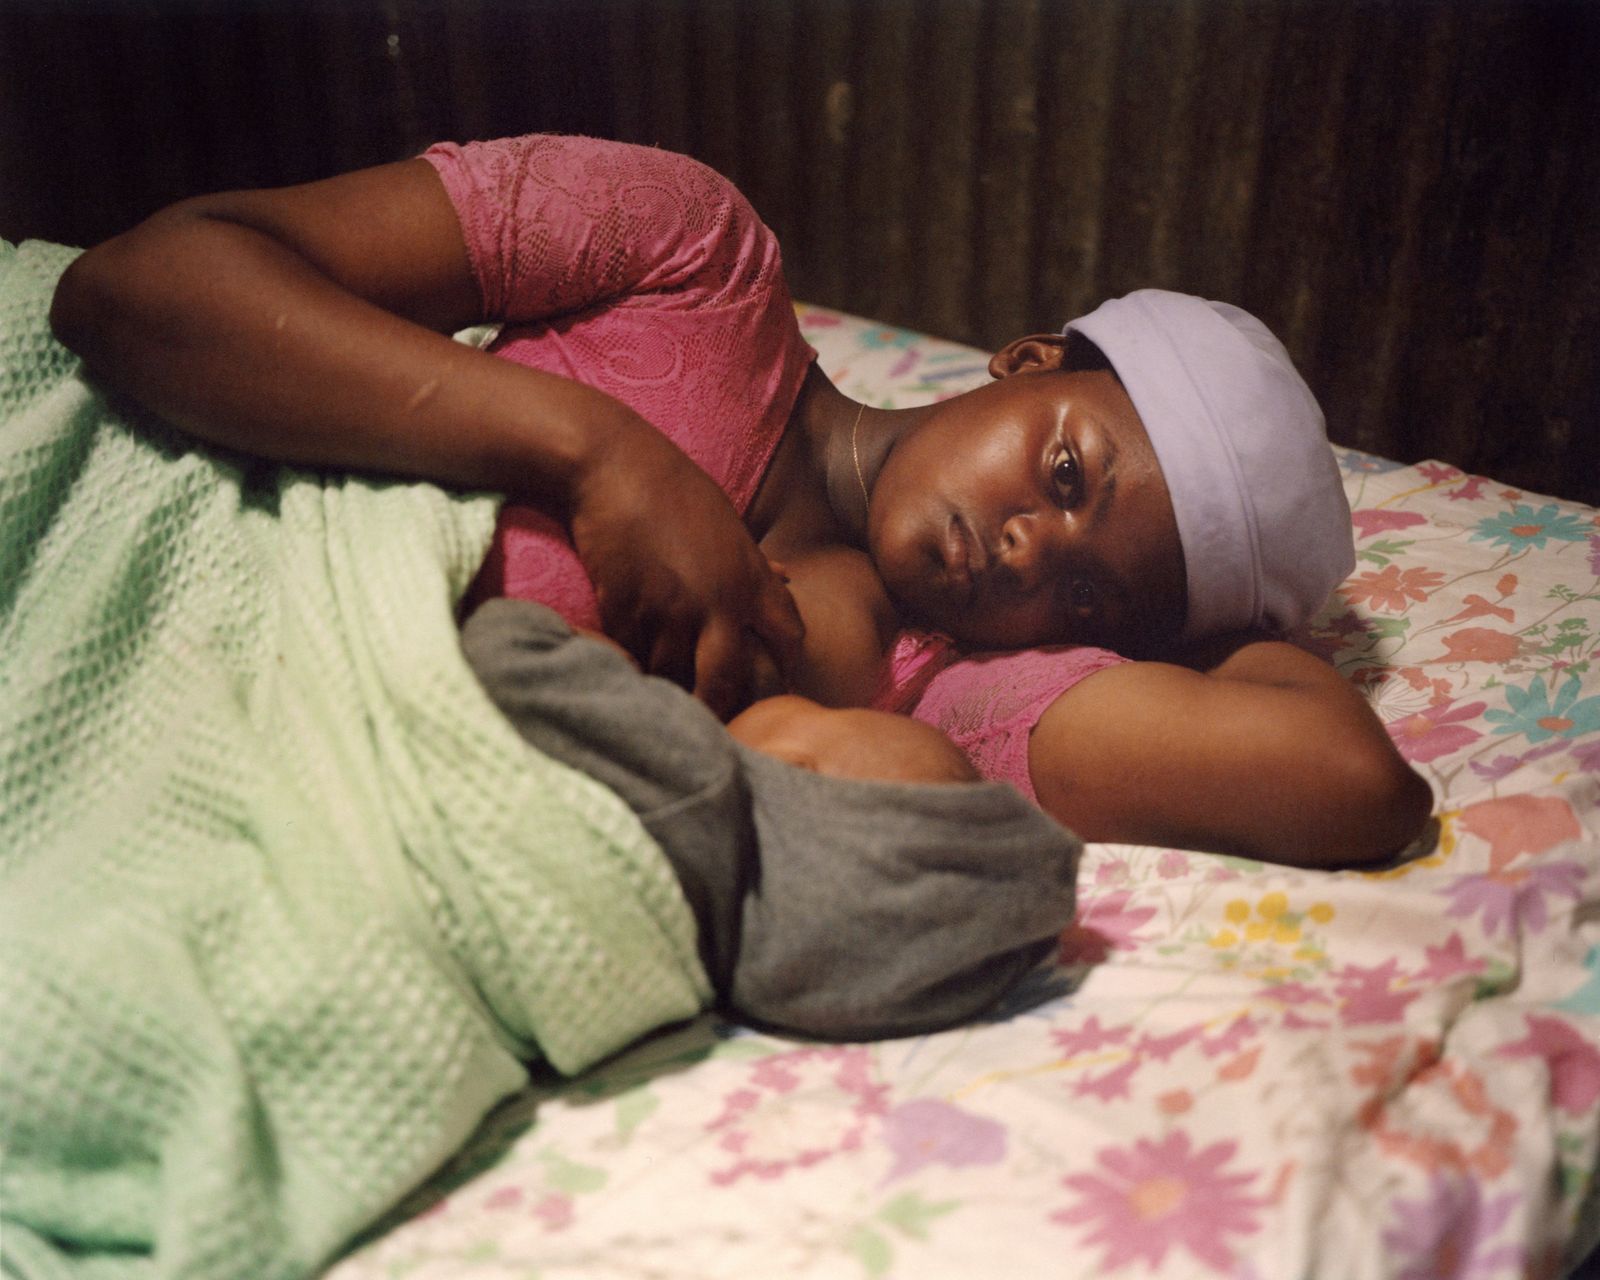 © Sofia Busk - Image from the Daughters of Nairobi photography project